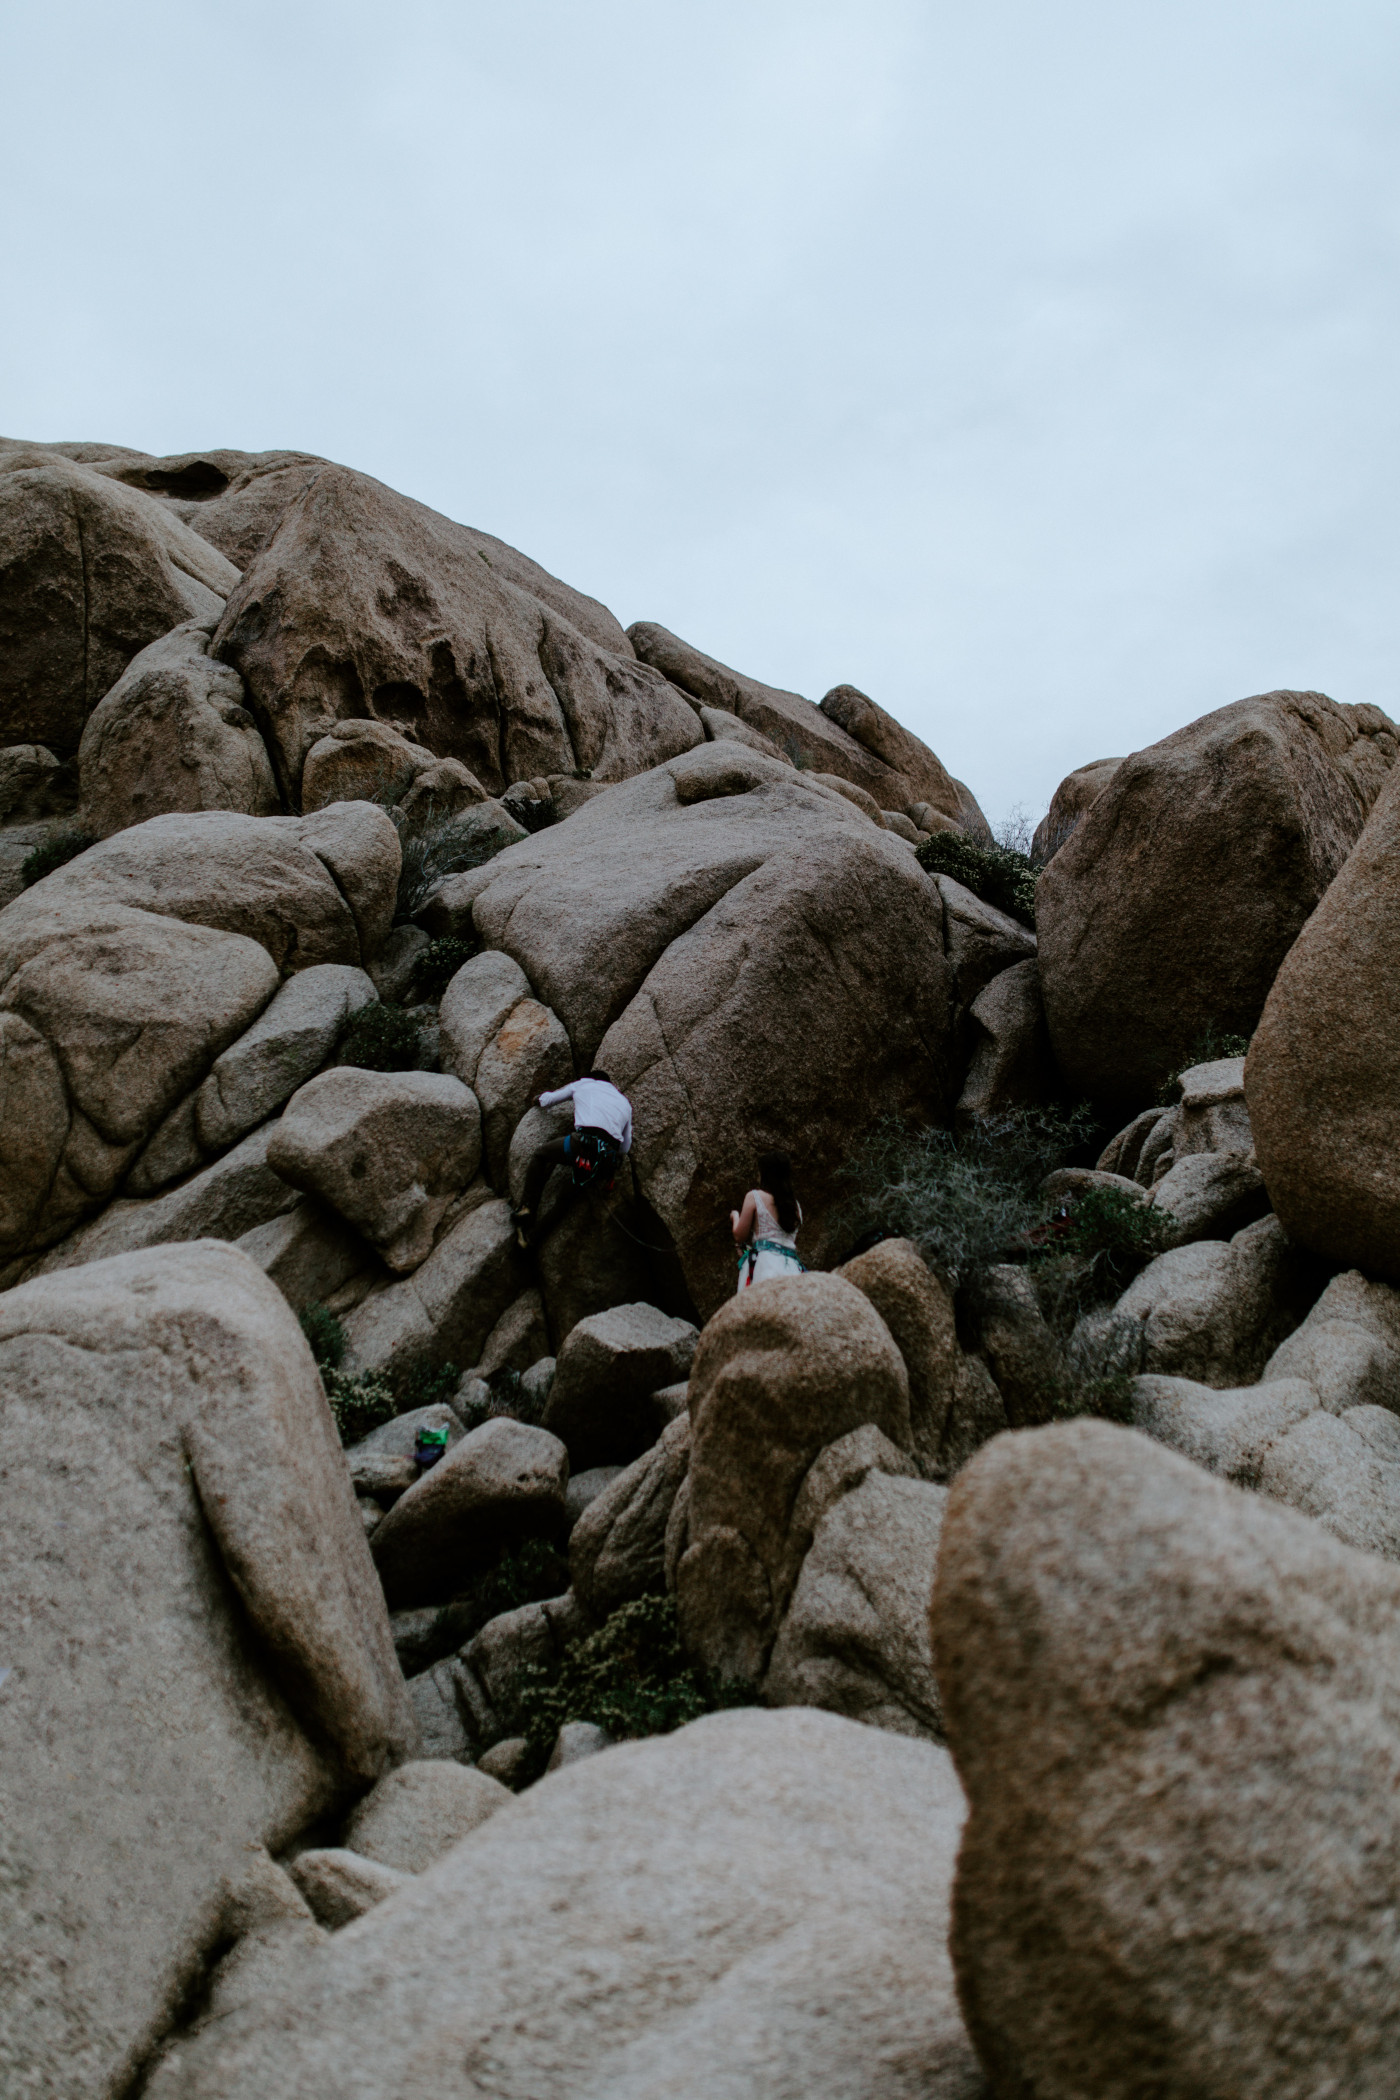 Shelby and Zack make their way up the boulders in Joshua Tree.